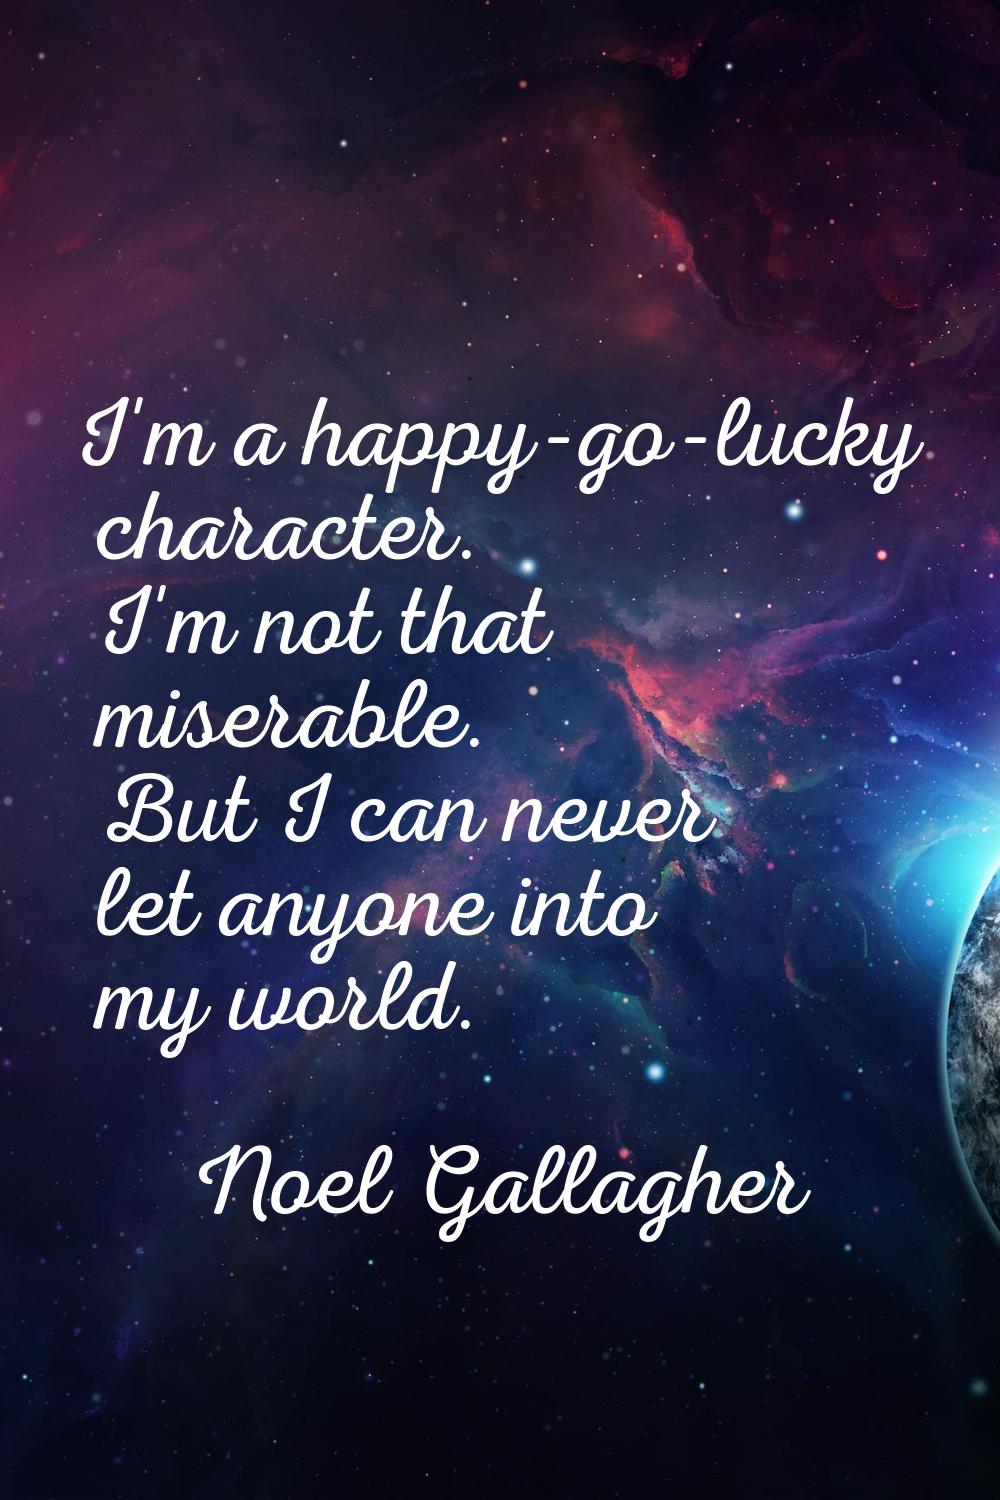 I'm a happy-go-lucky character. I'm not that miserable. But I can never let anyone into my world.